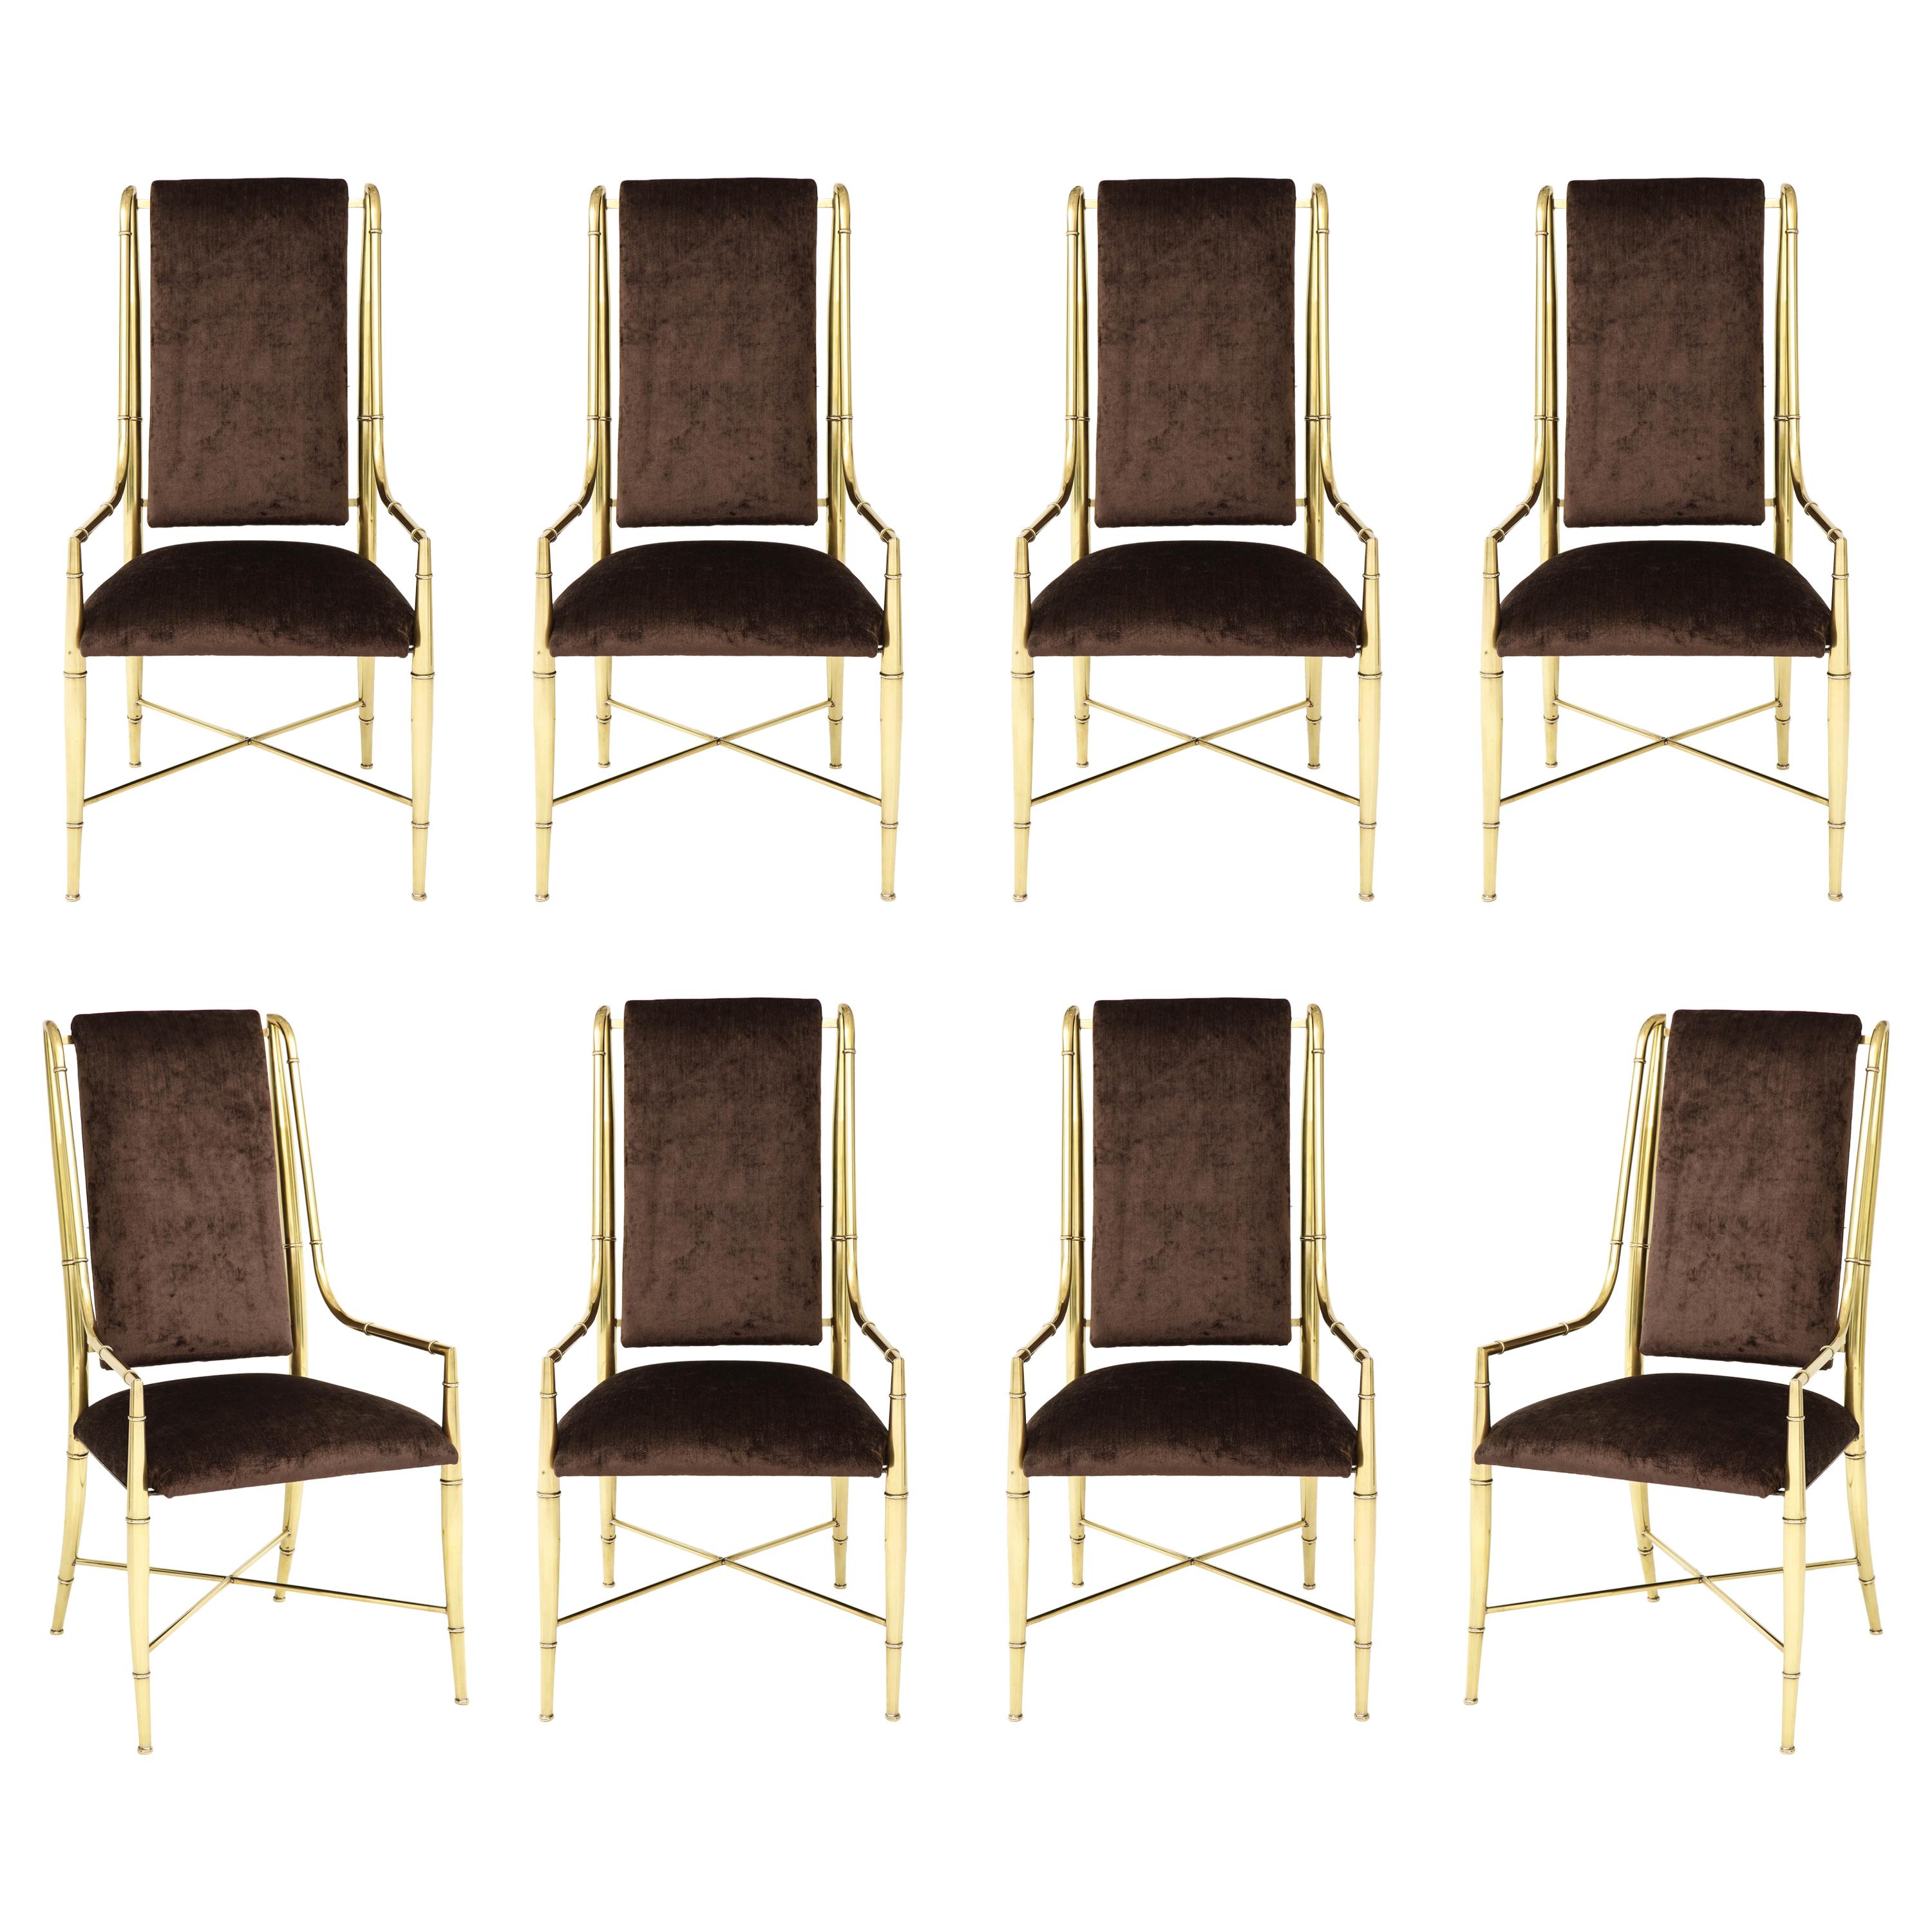 "The Imperial Chair" Set of Eight by Weiman / Warren Lloyd for Mastercraft